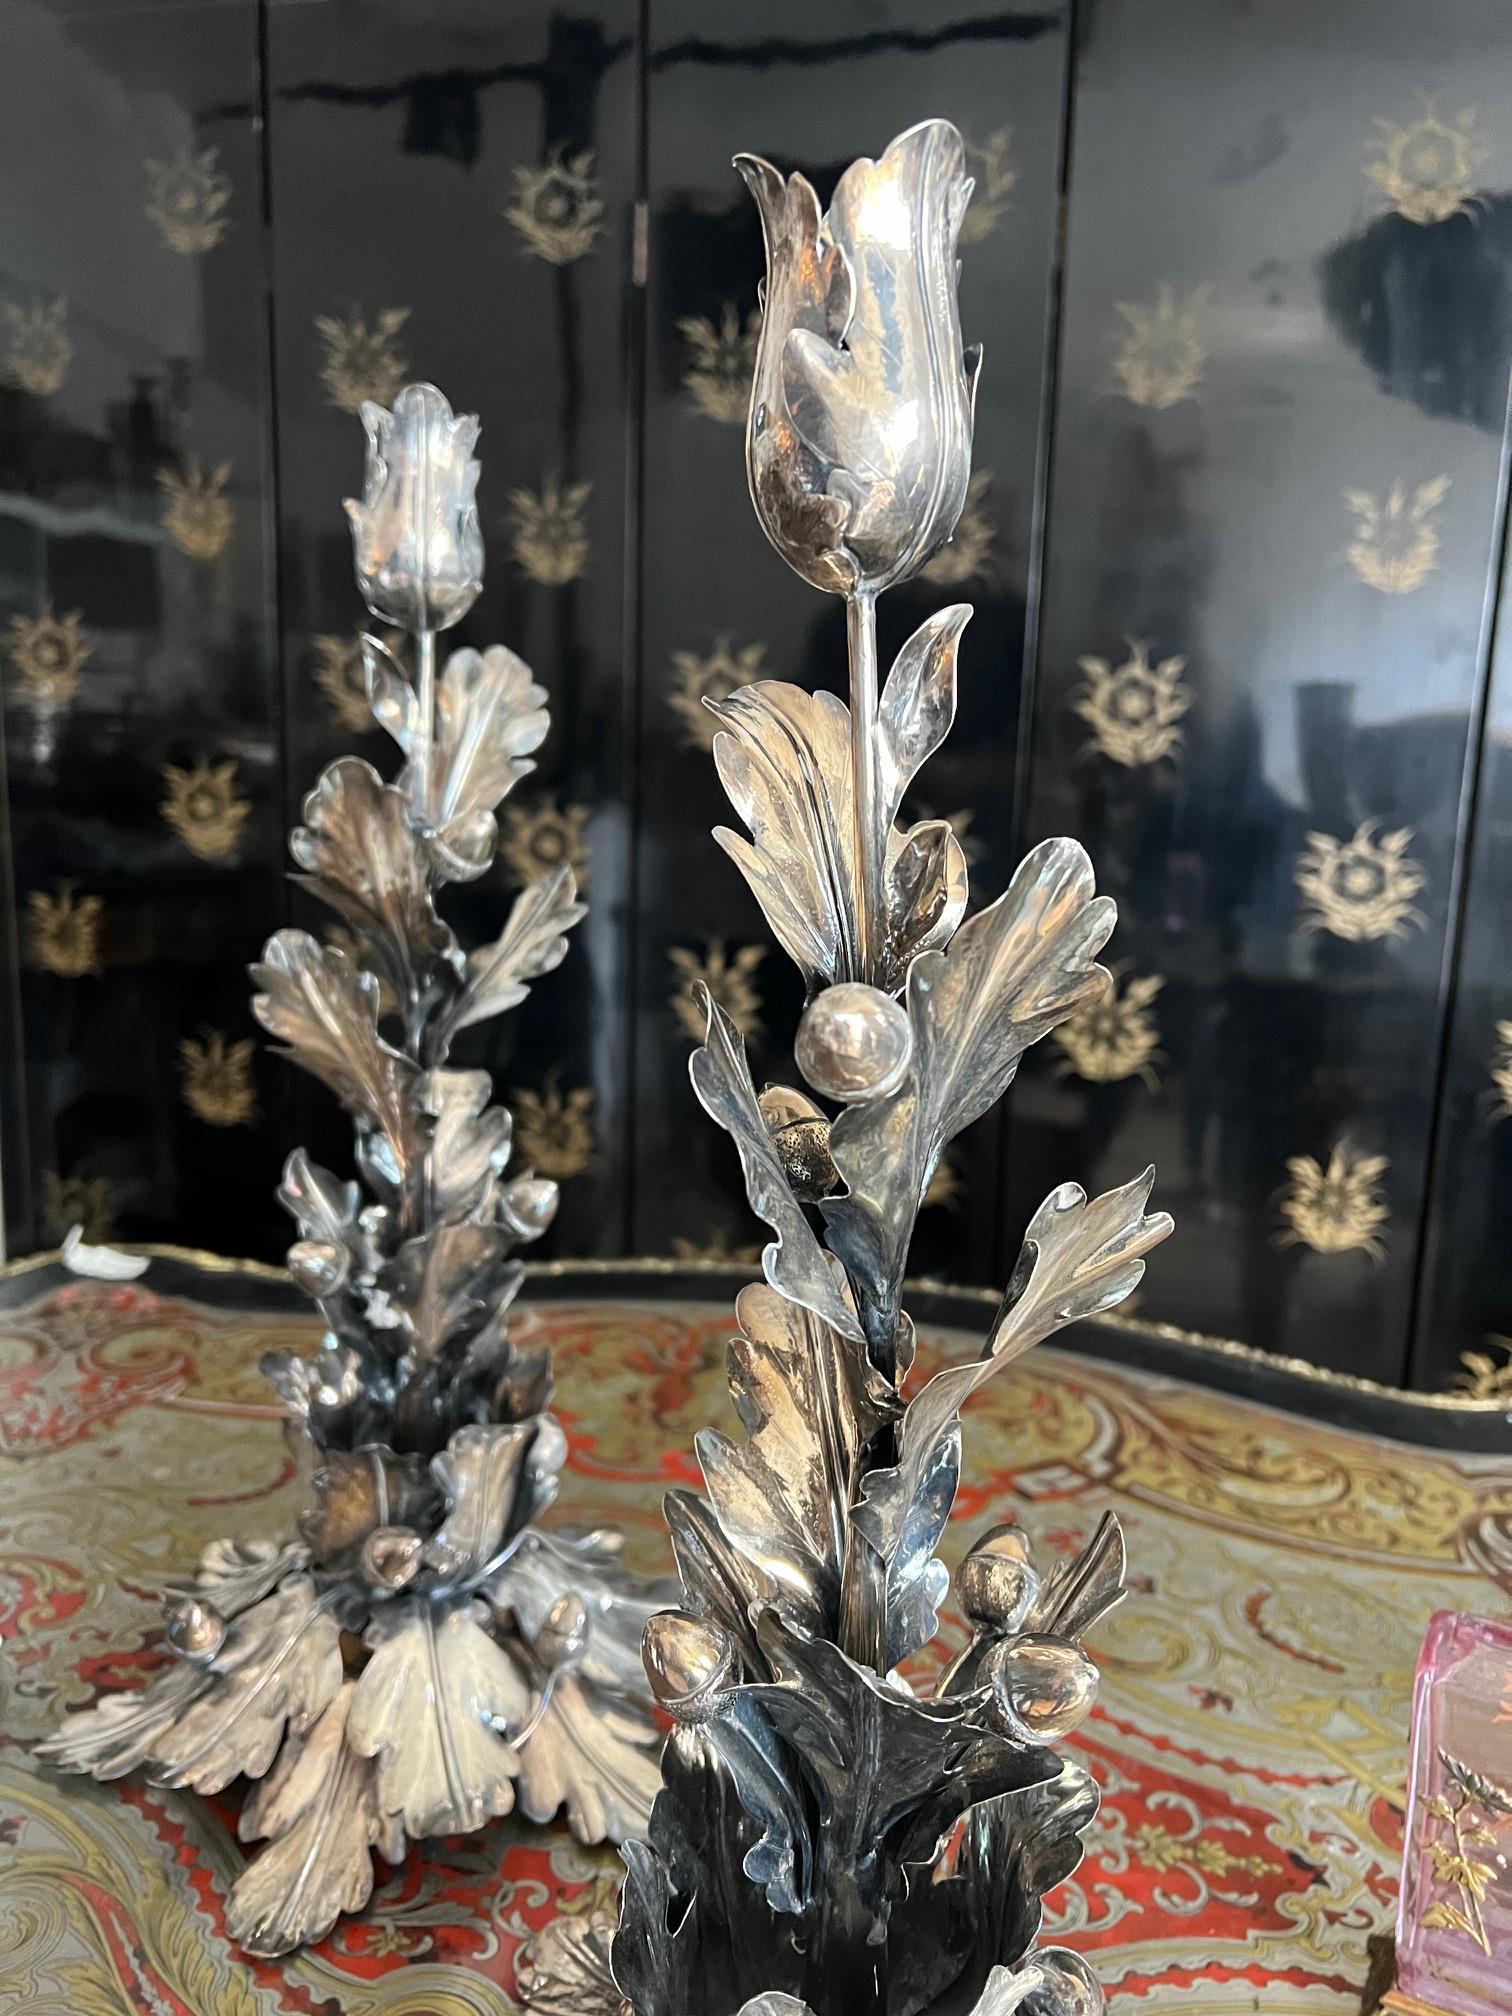 A PAIR OF BUCCELLATI STYLE STERLING SILVER CANDLESTICKS MODELLED AS TULIPS - Image 6 of 7